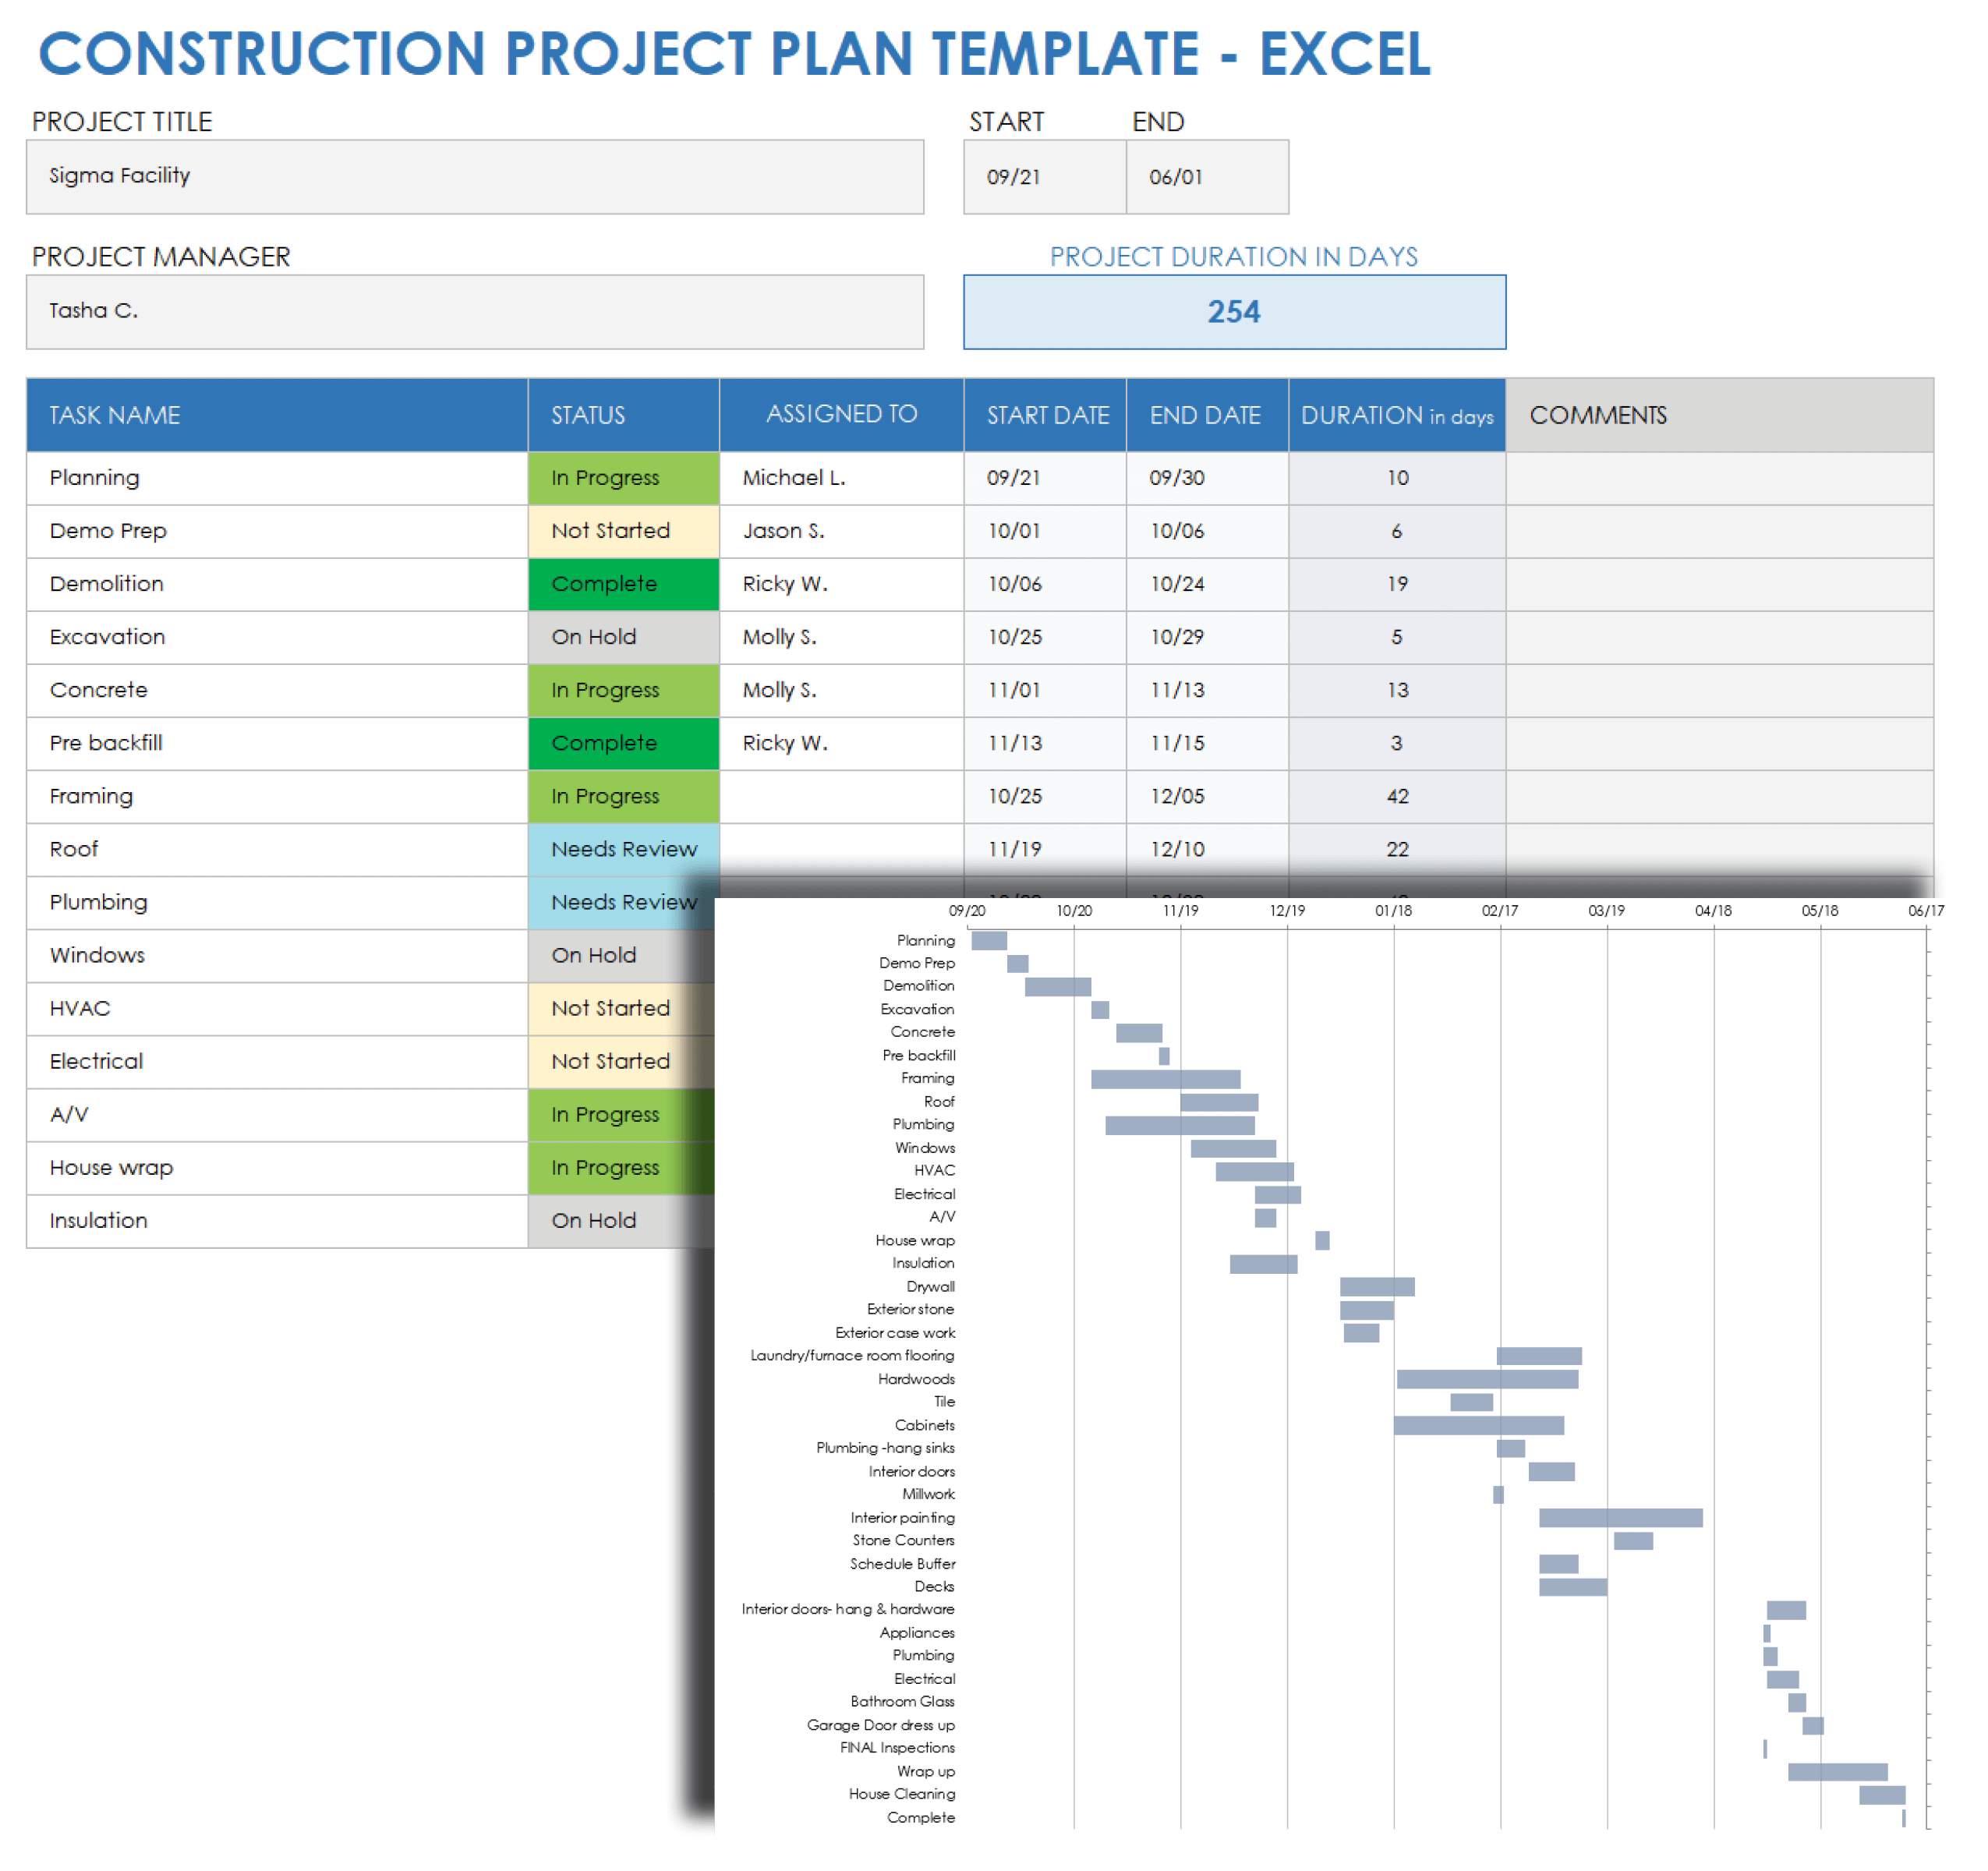 Construction Project Plan Excel Template